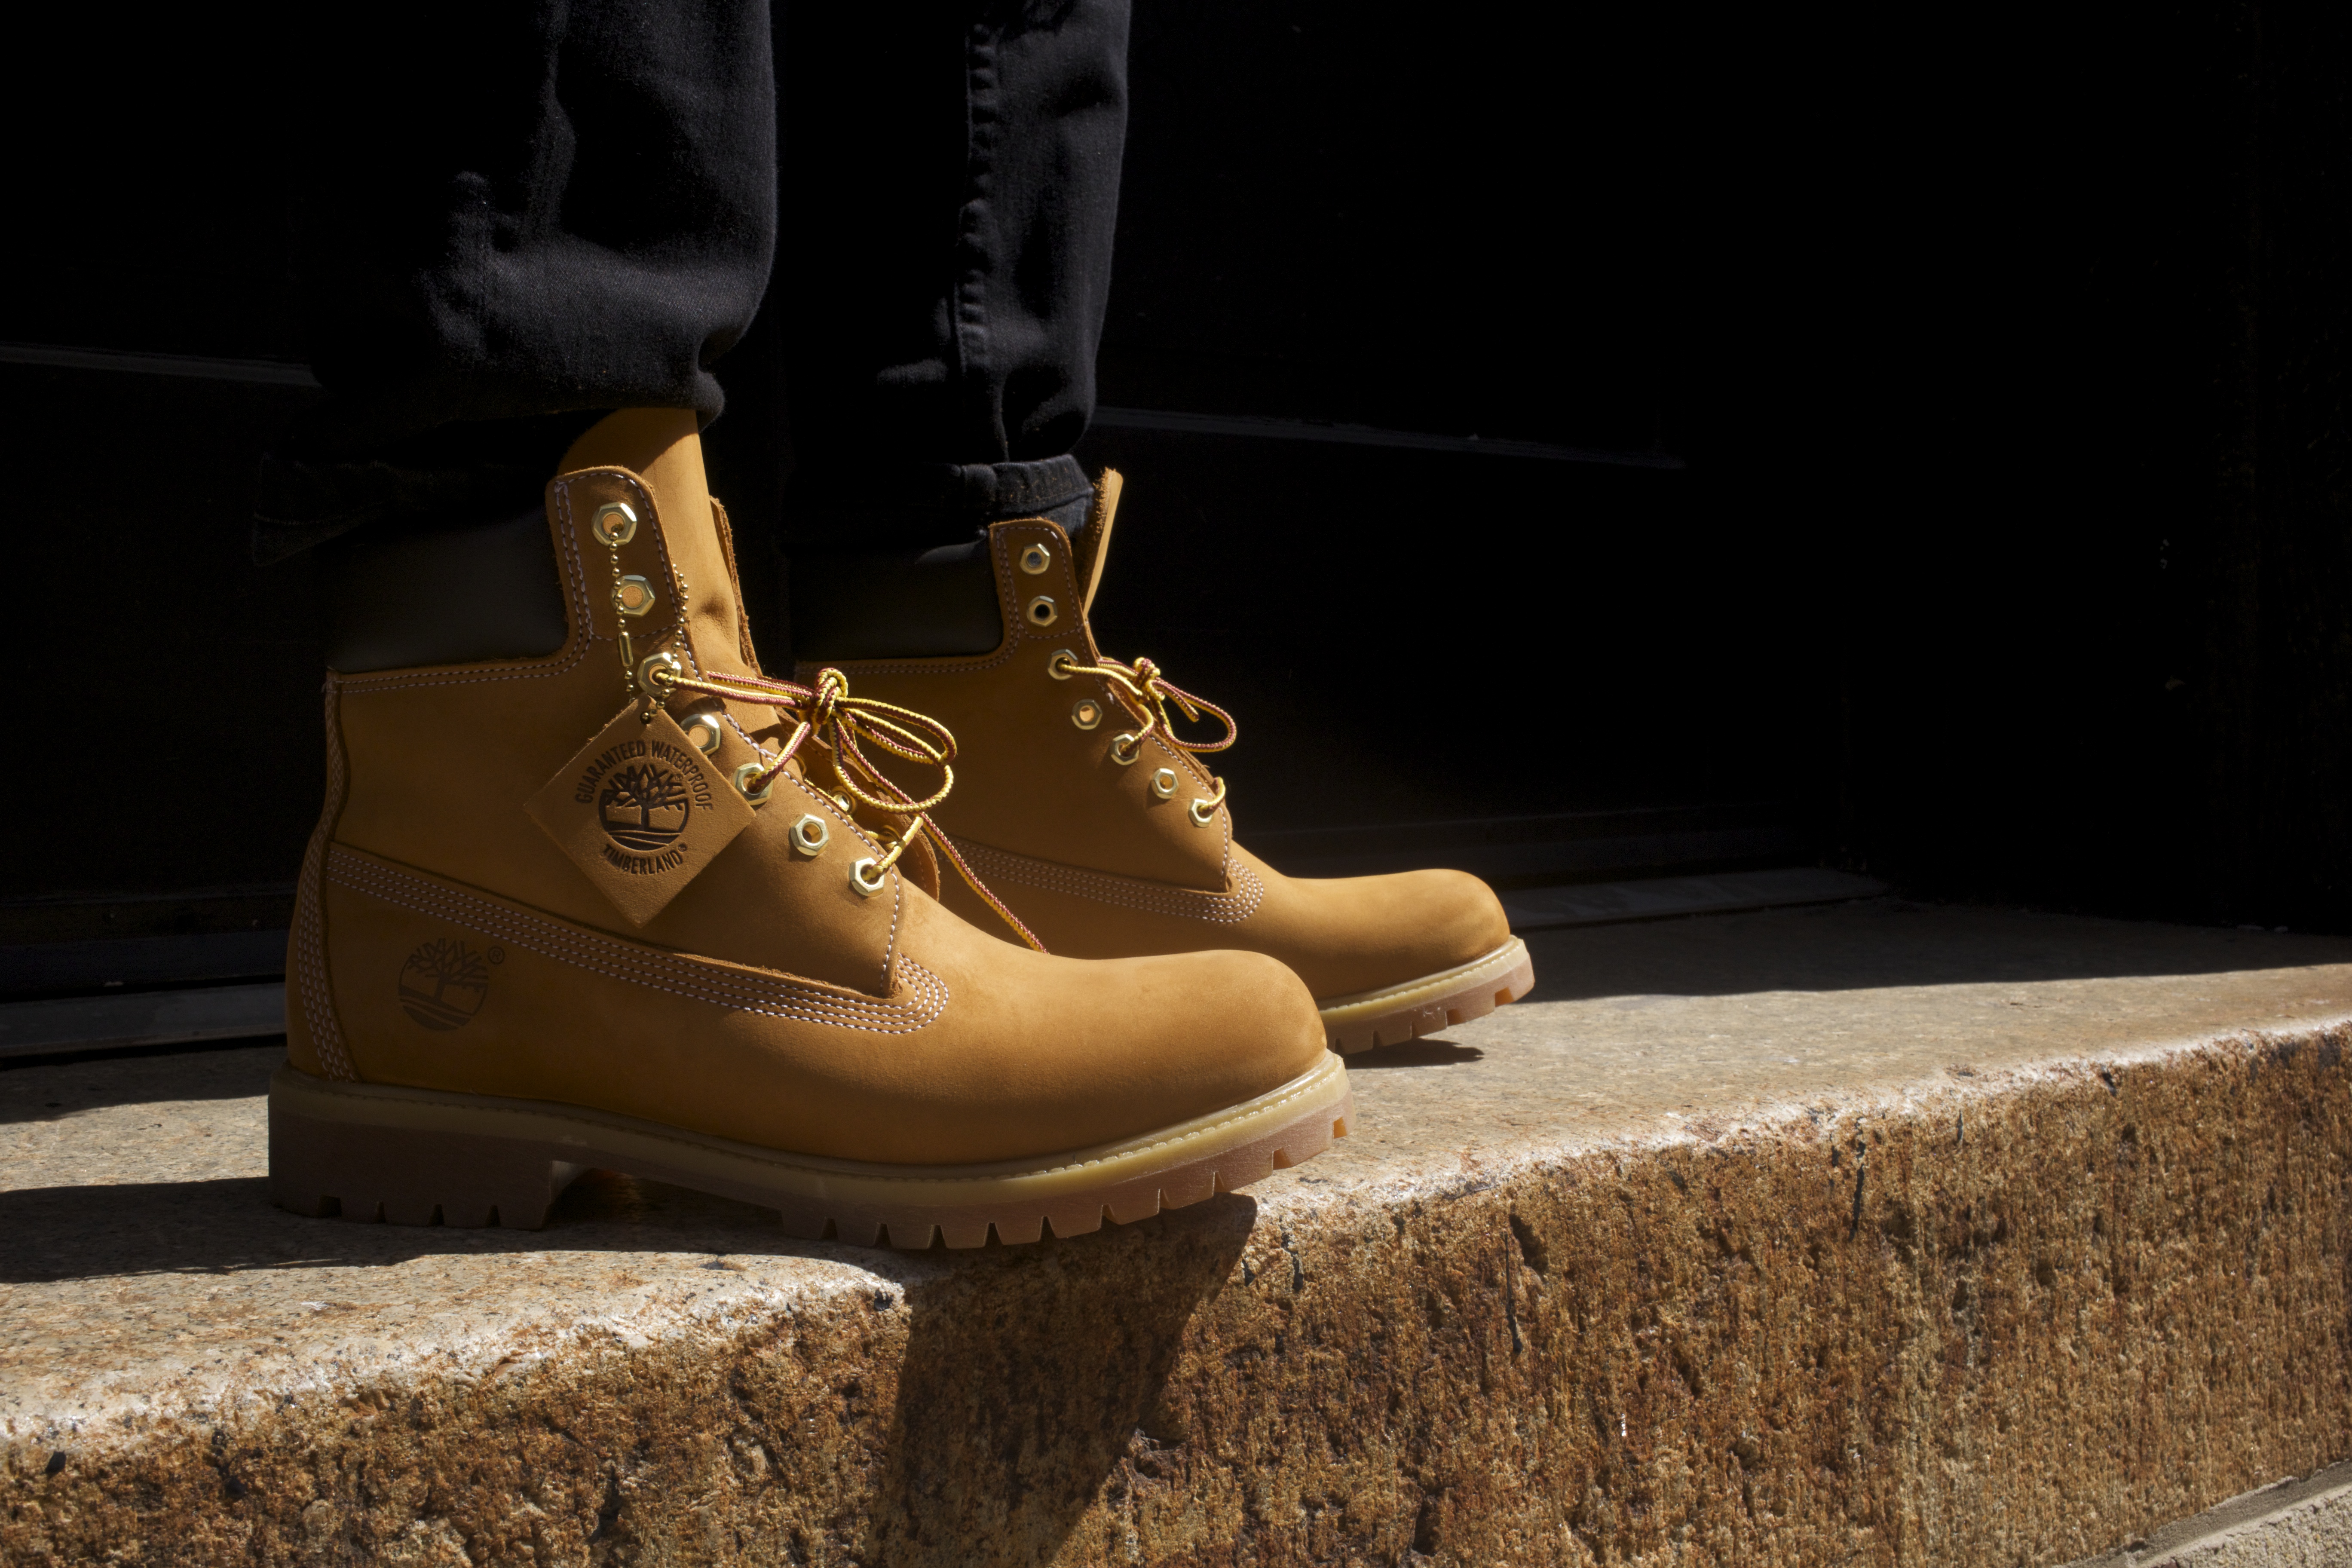 Sabir of Men's Style Pro in 6 Inch Wheat Timberland Boots